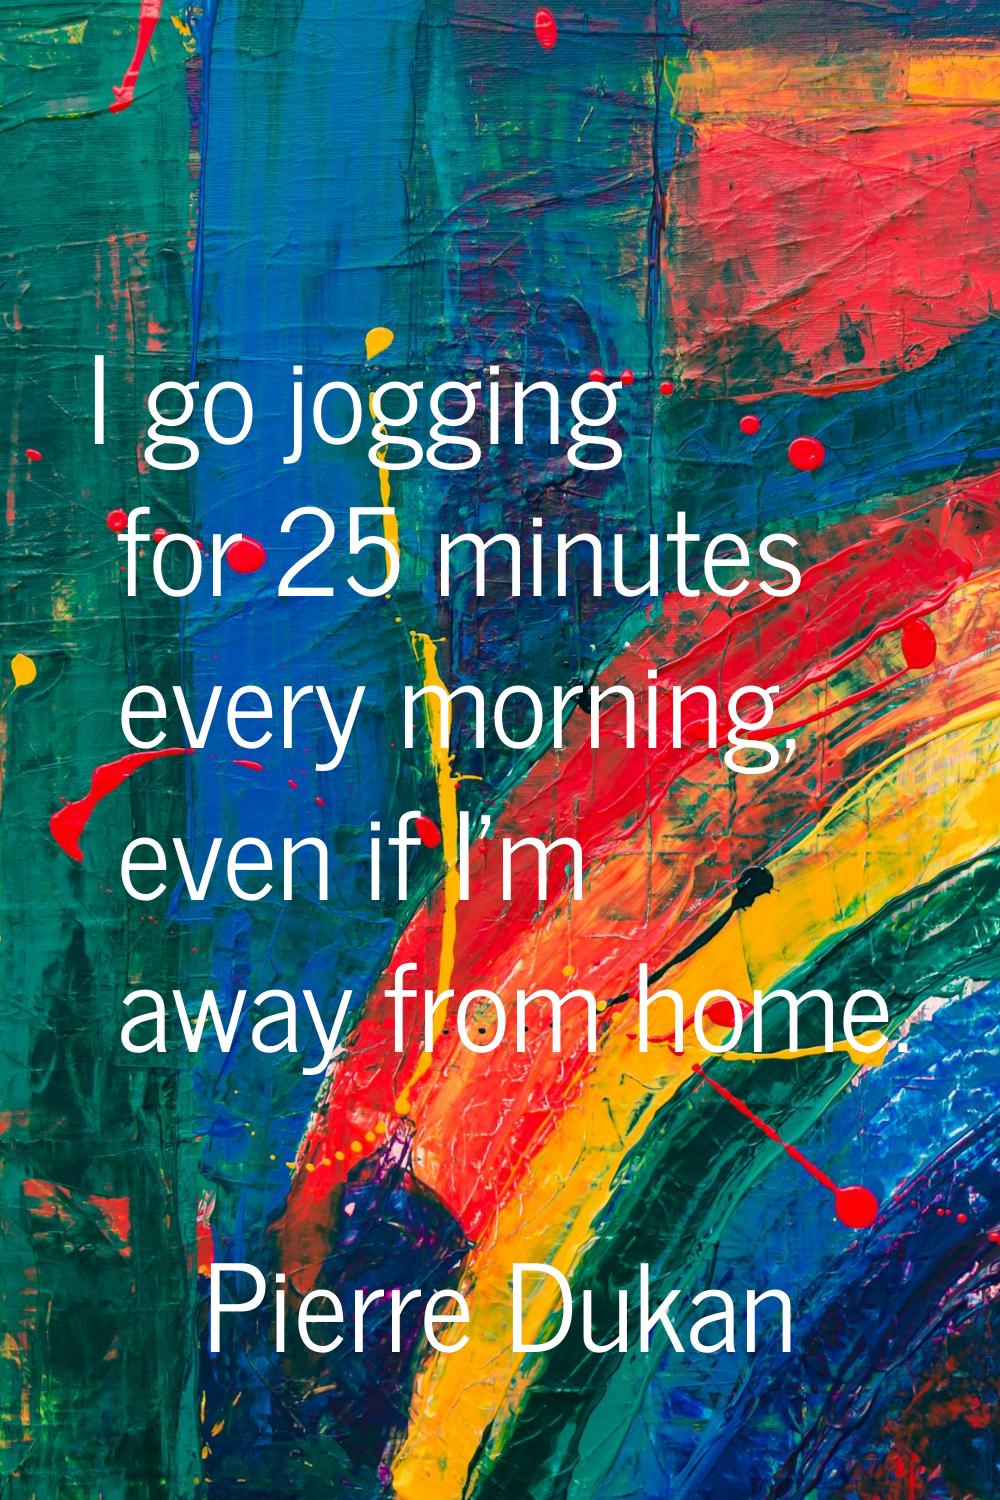 I go jogging for 25 minutes every morning, even if I'm away from home.